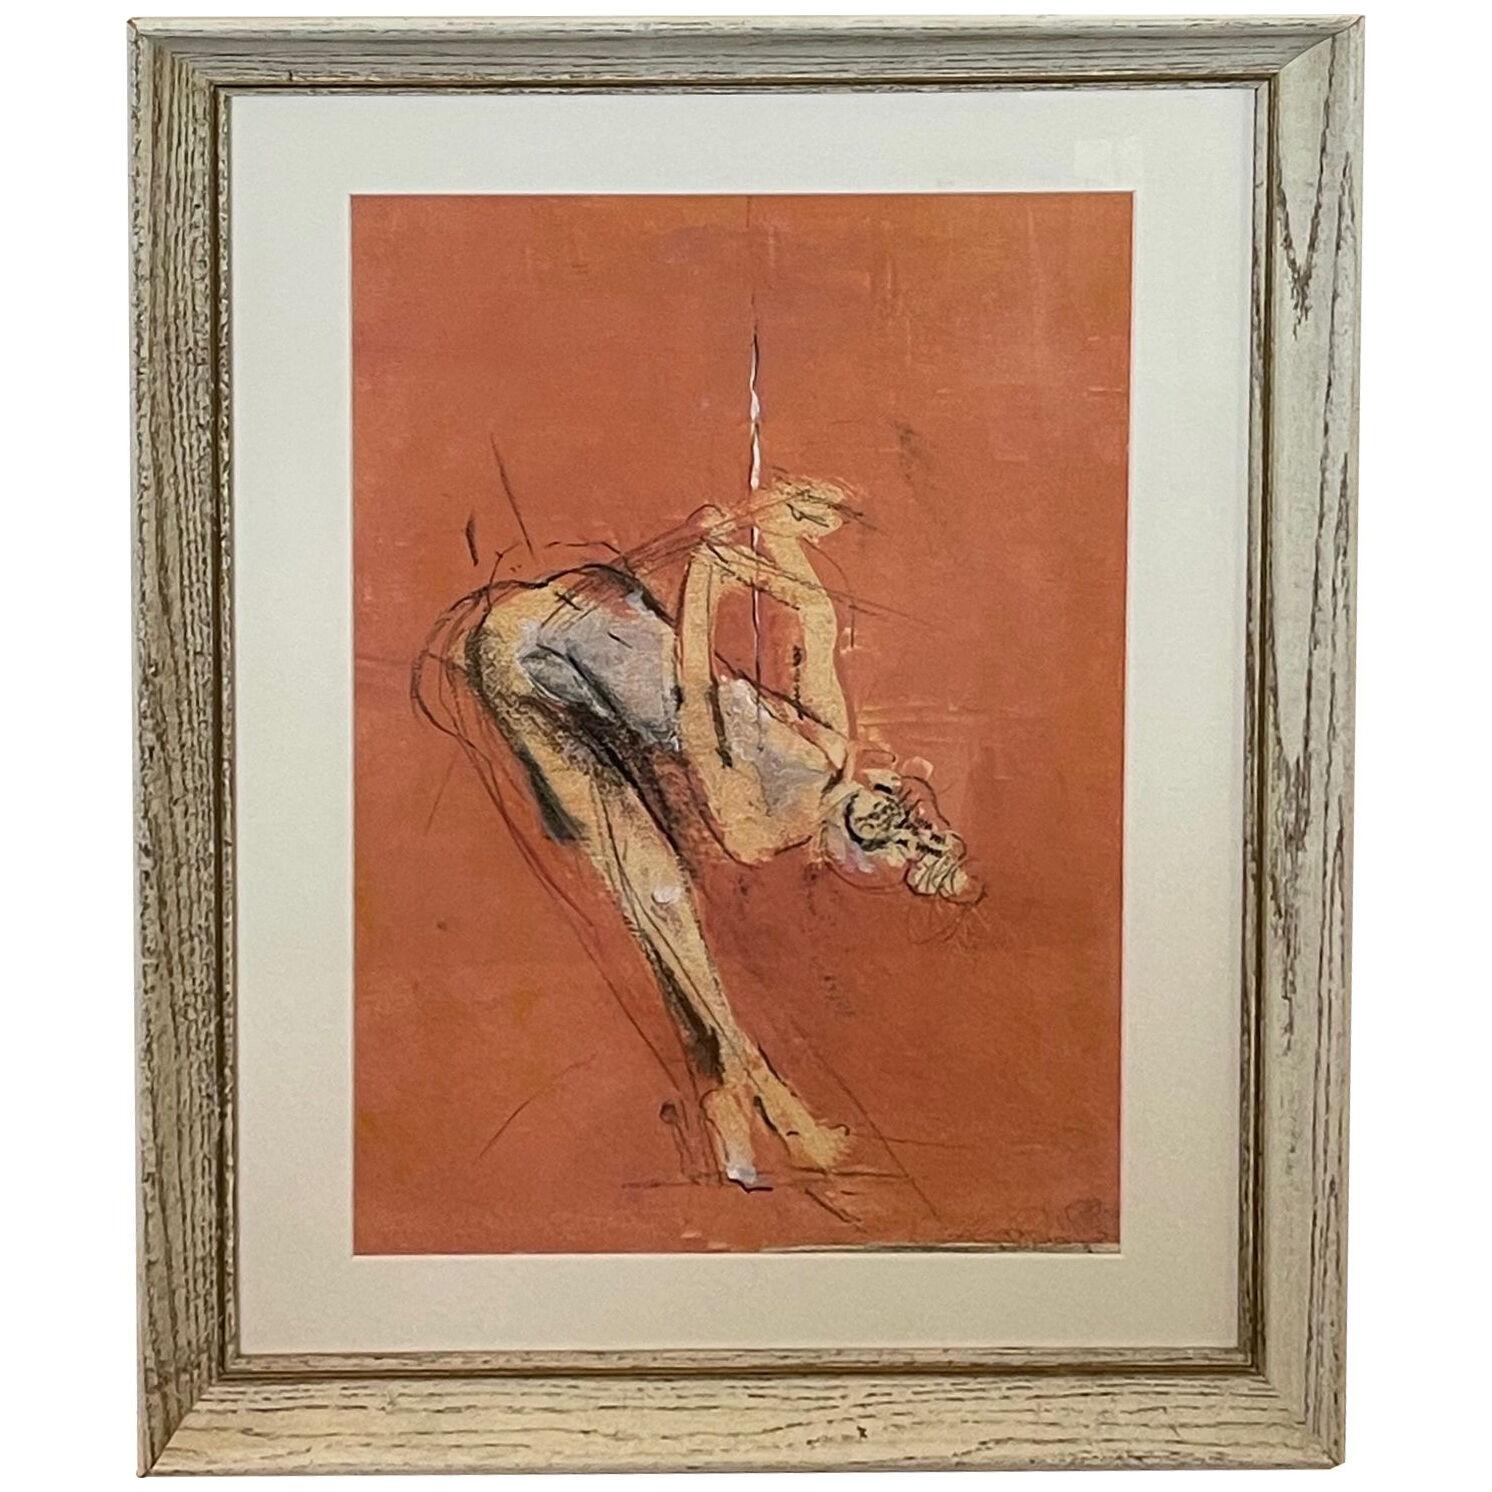 Gouache, charcoal and pastel on paper; mid-century drawing of a ballerina